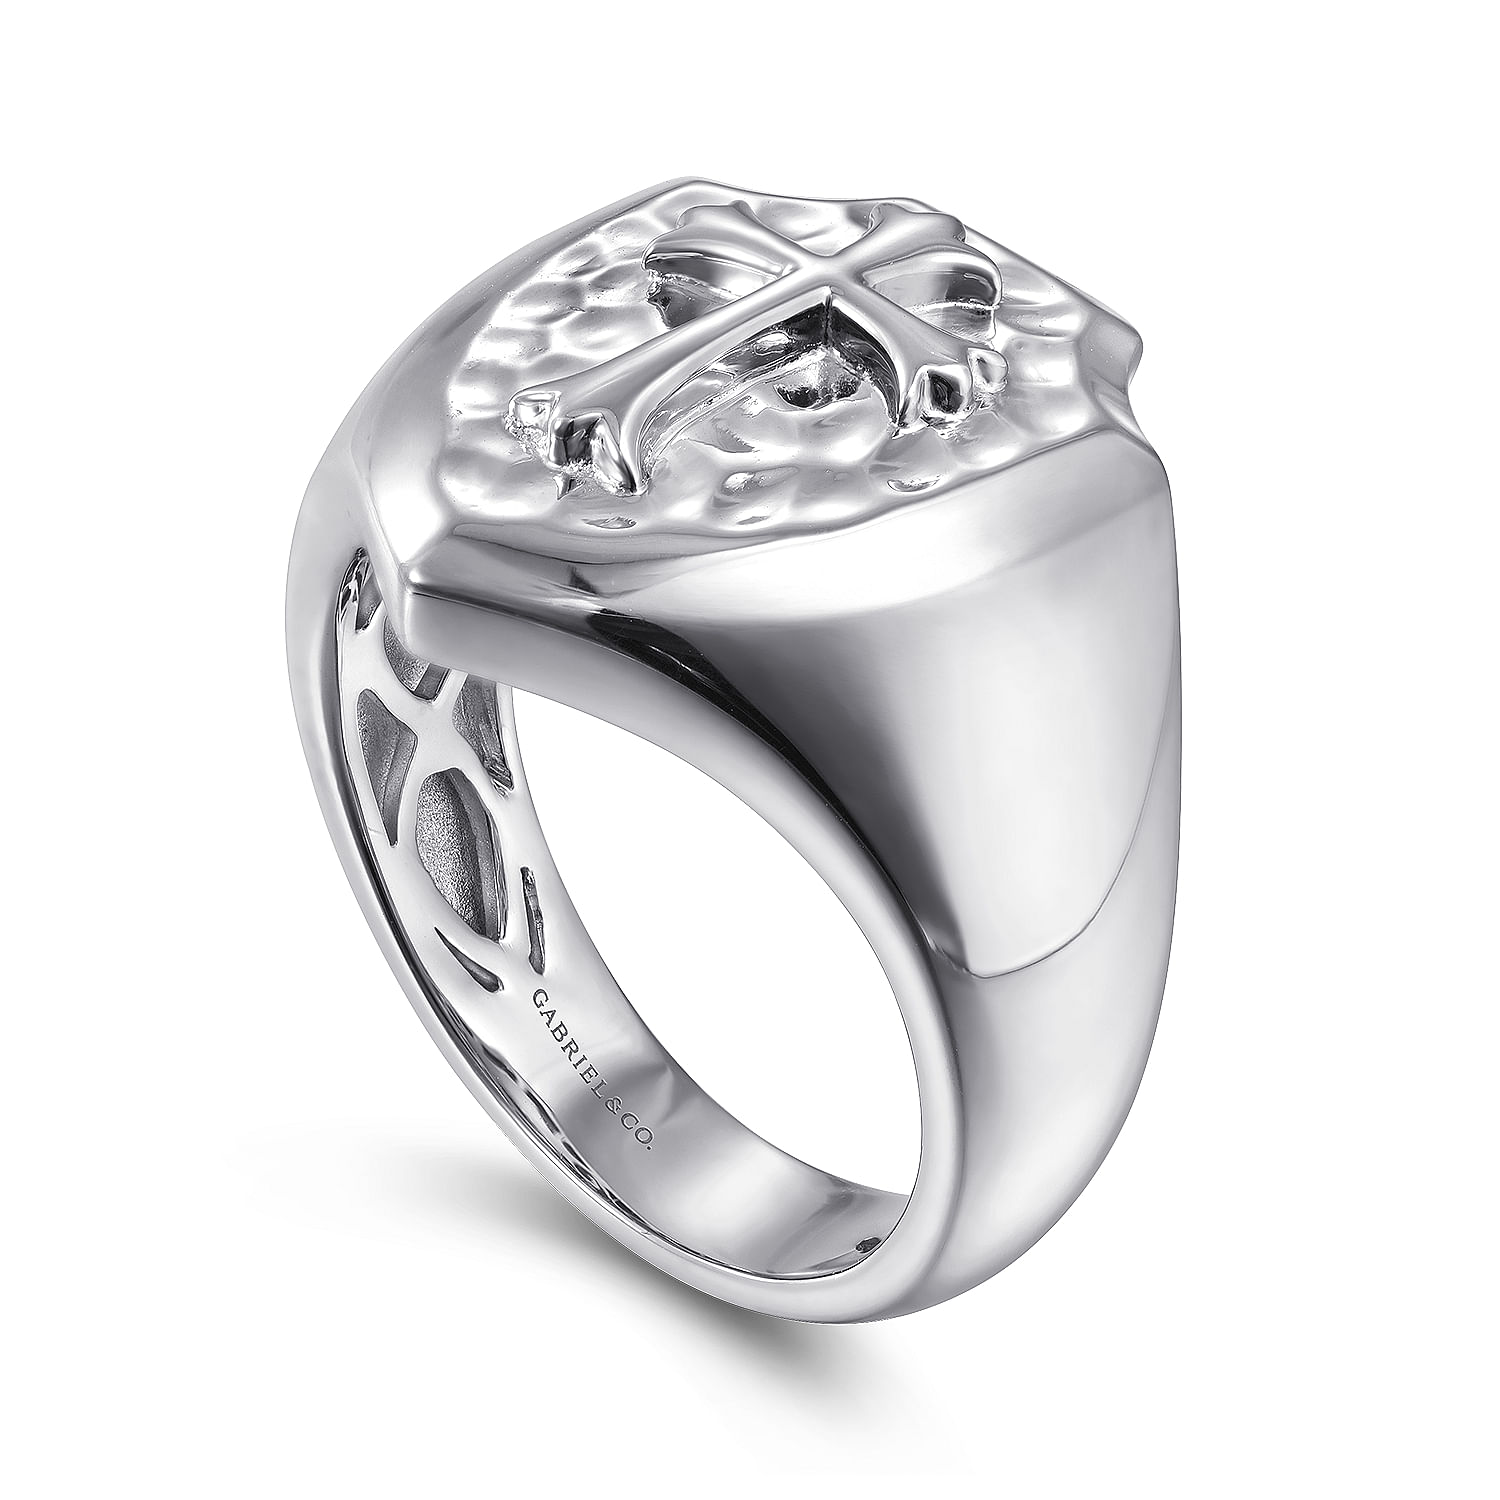 Wide 925 Sterling Silver Cross Signet Ring in High Polished Finish